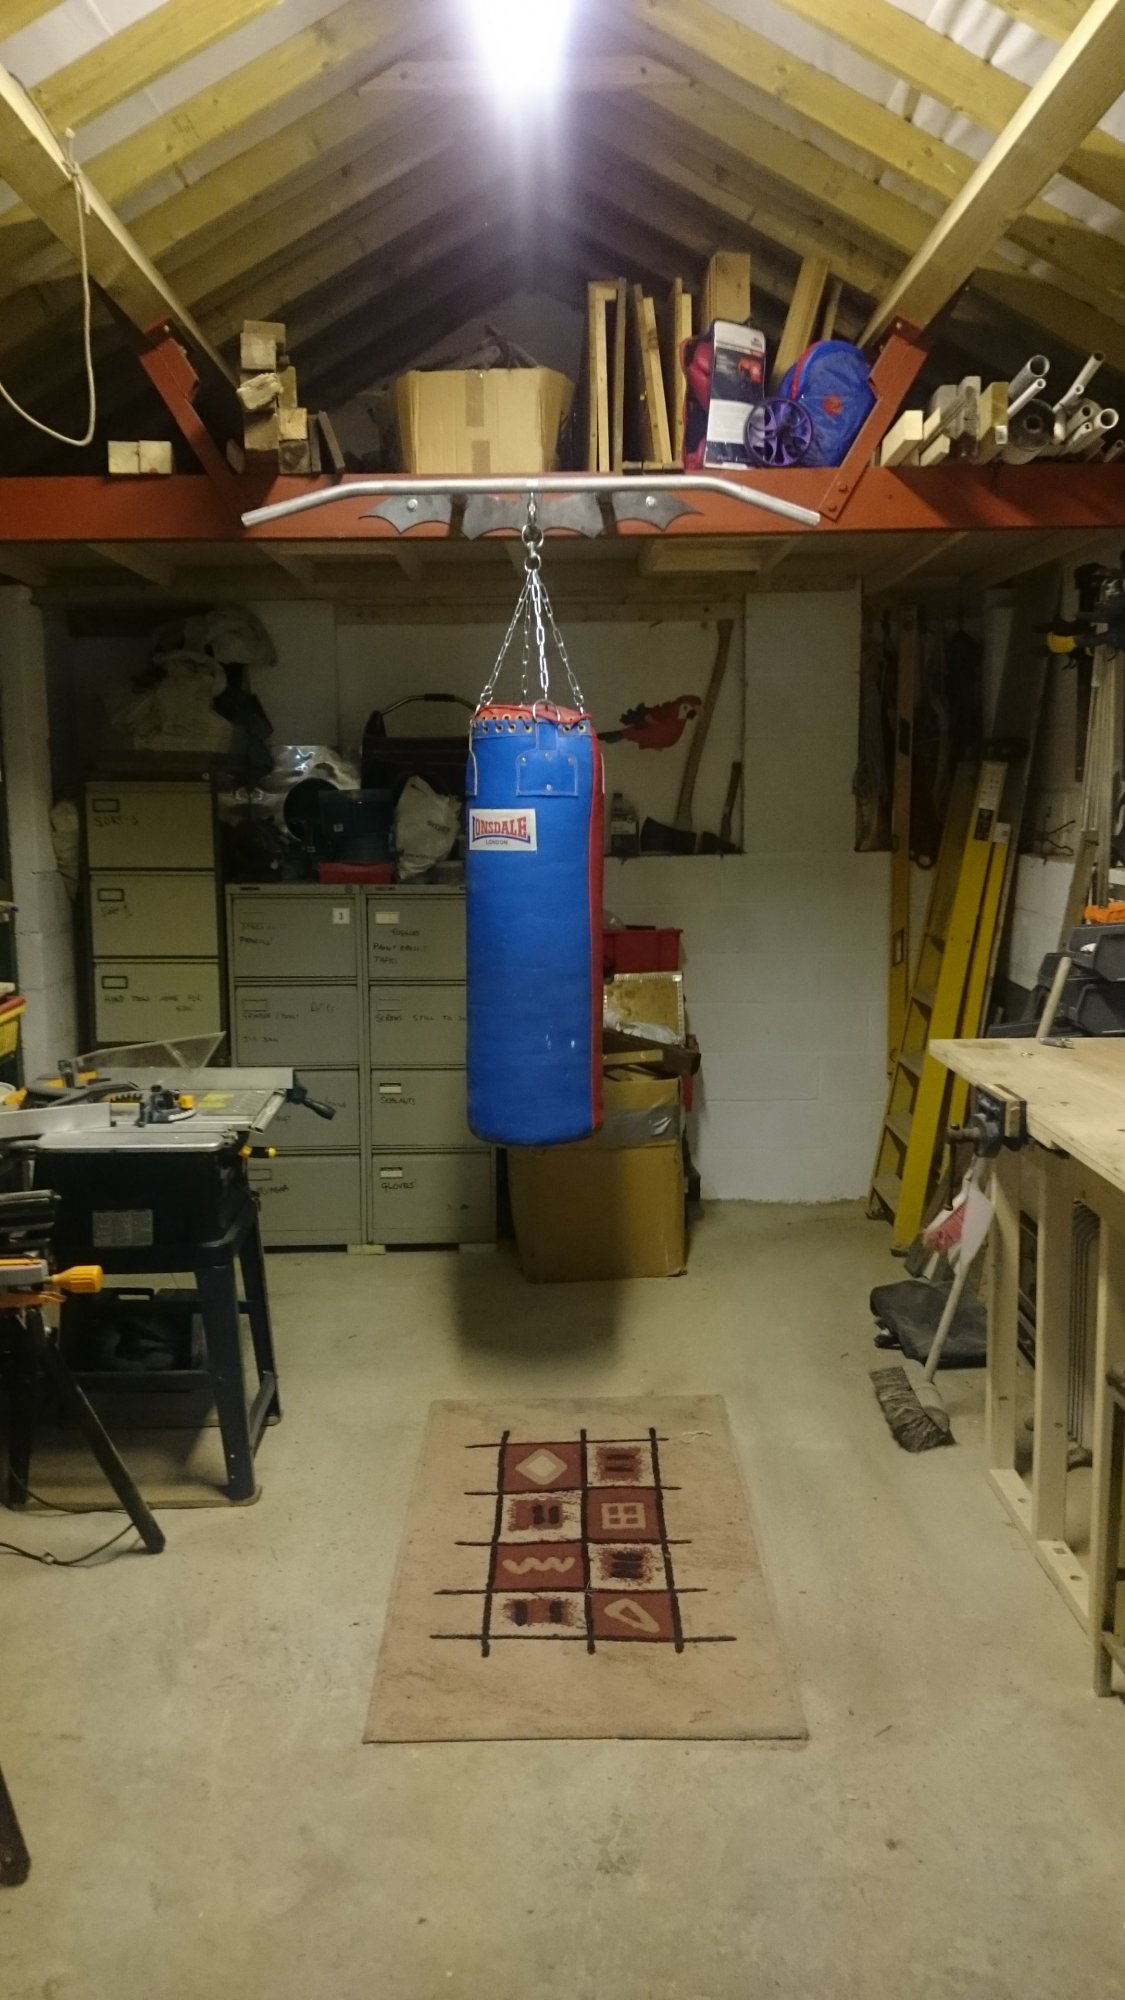 Pull-up bar and punch bag